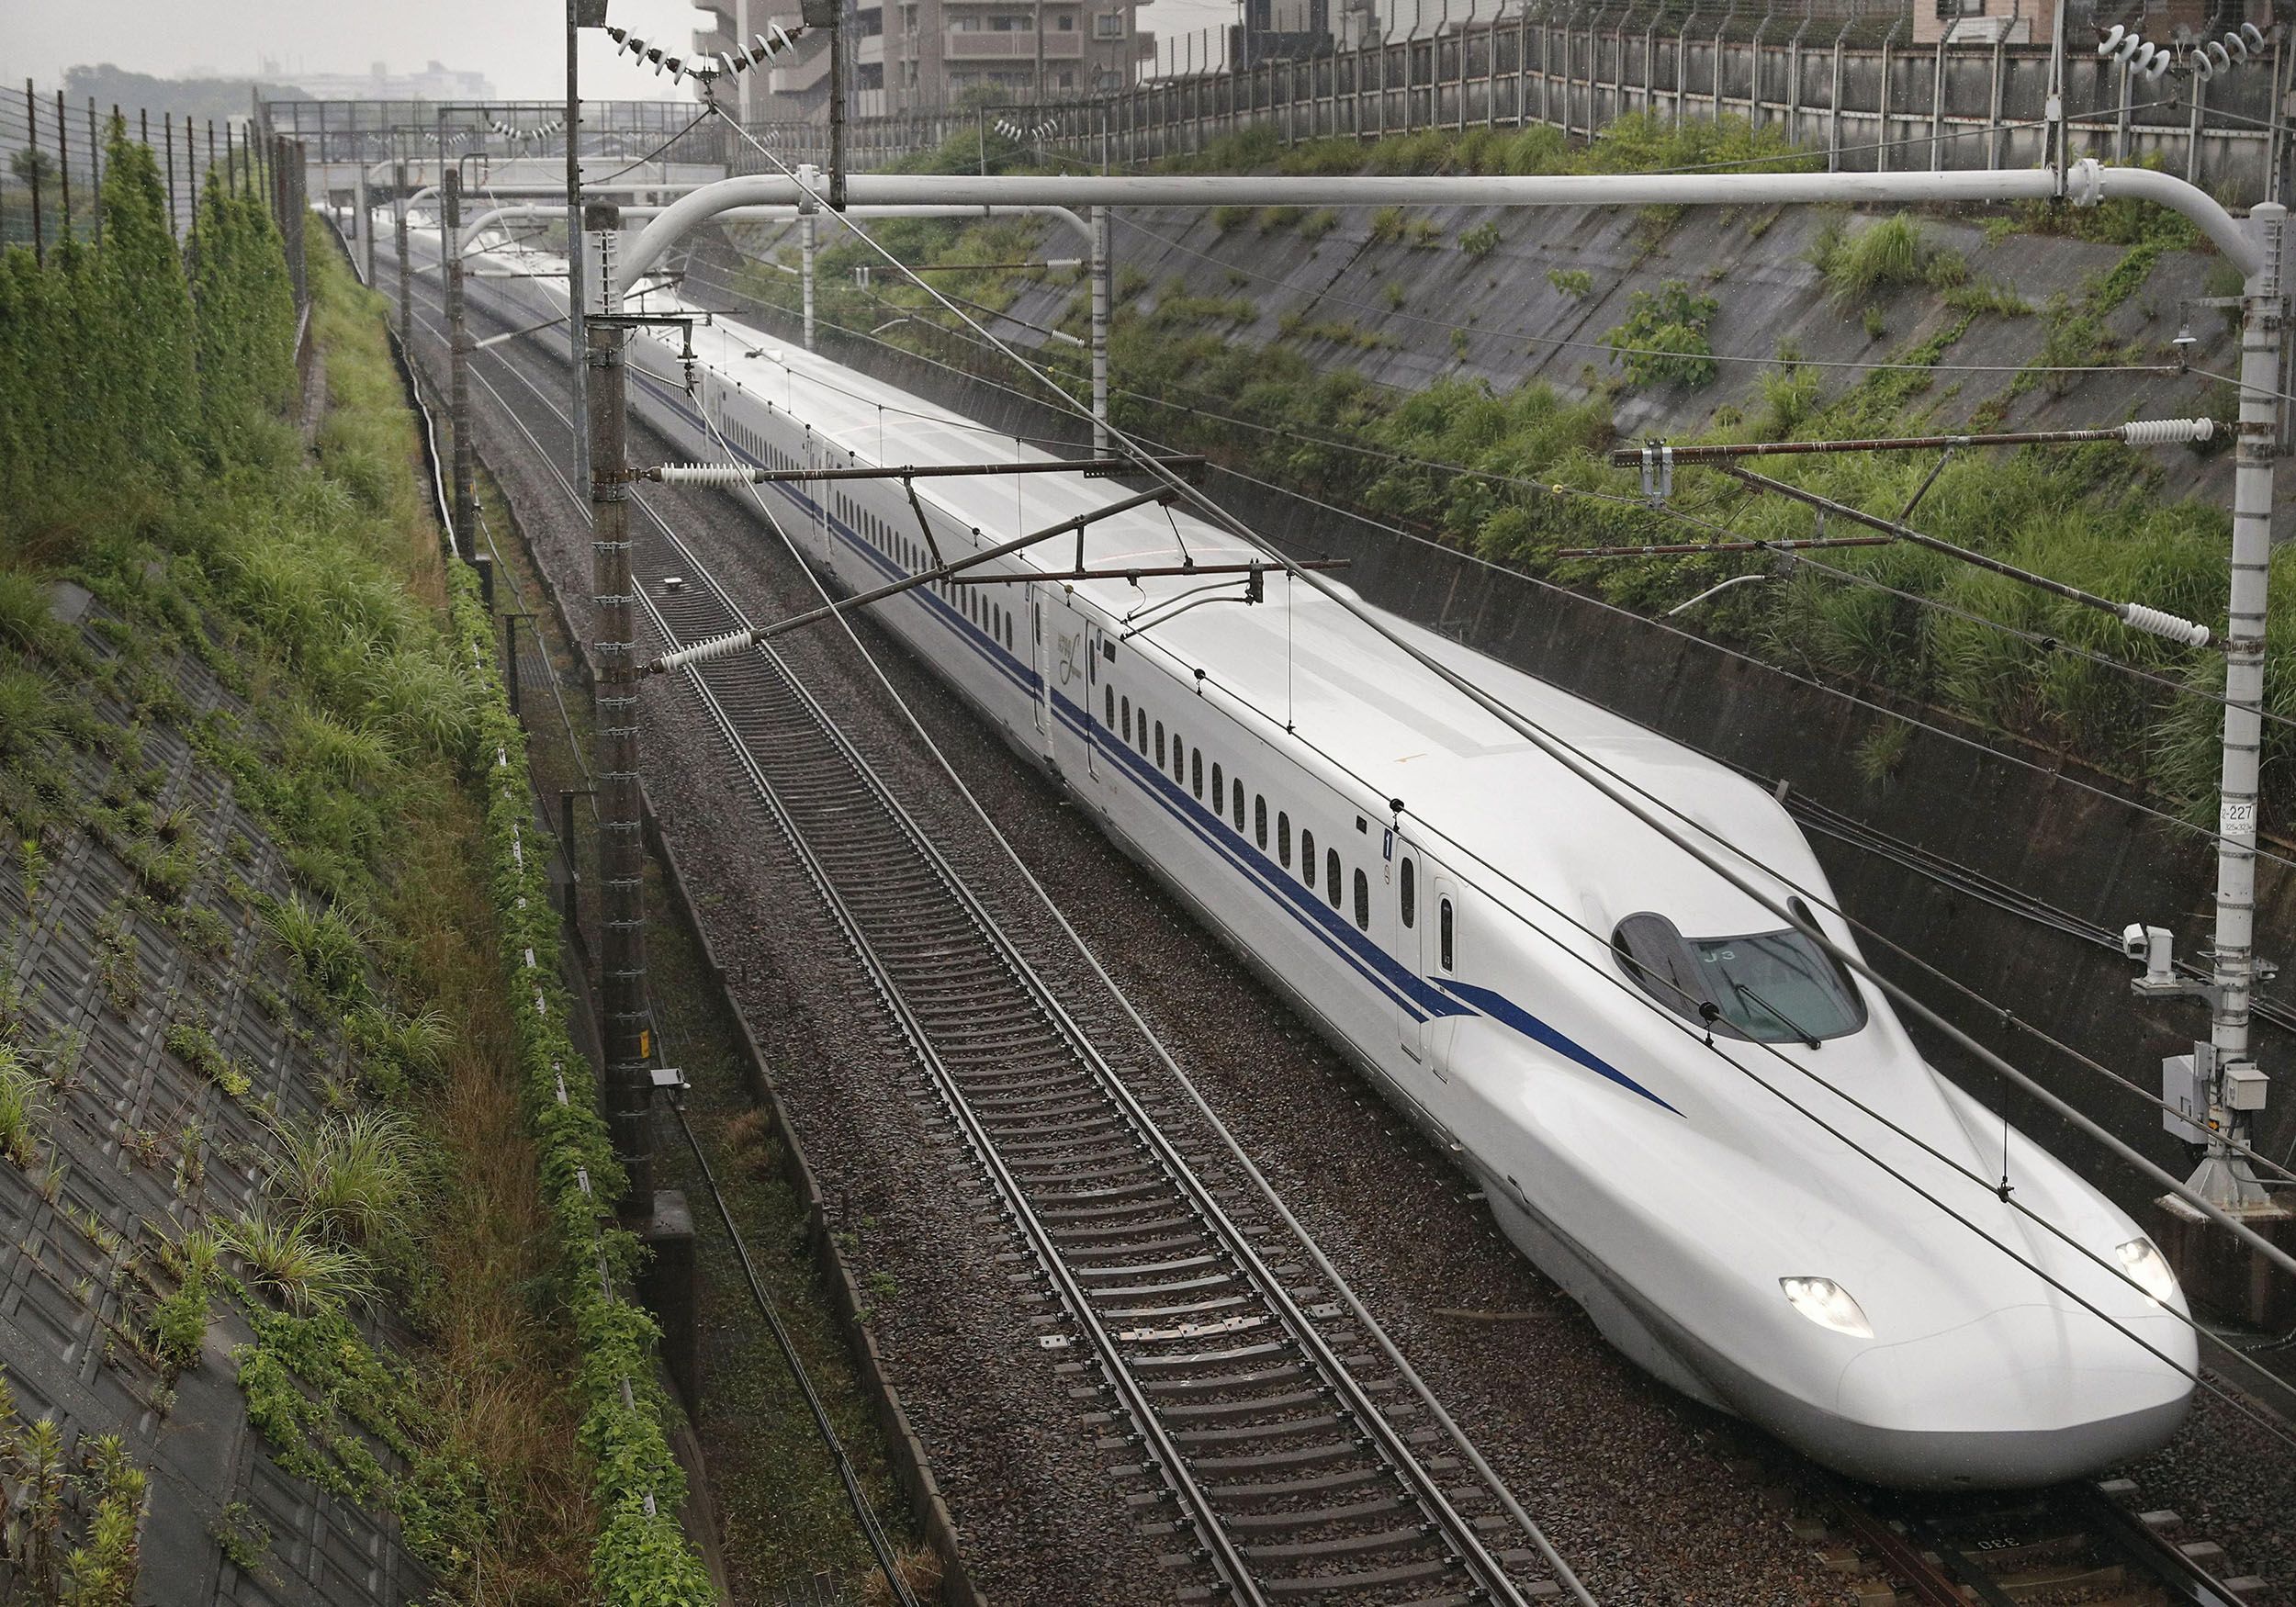 Work on Mumbai-Ahmedabad bullet train project likely to speed up